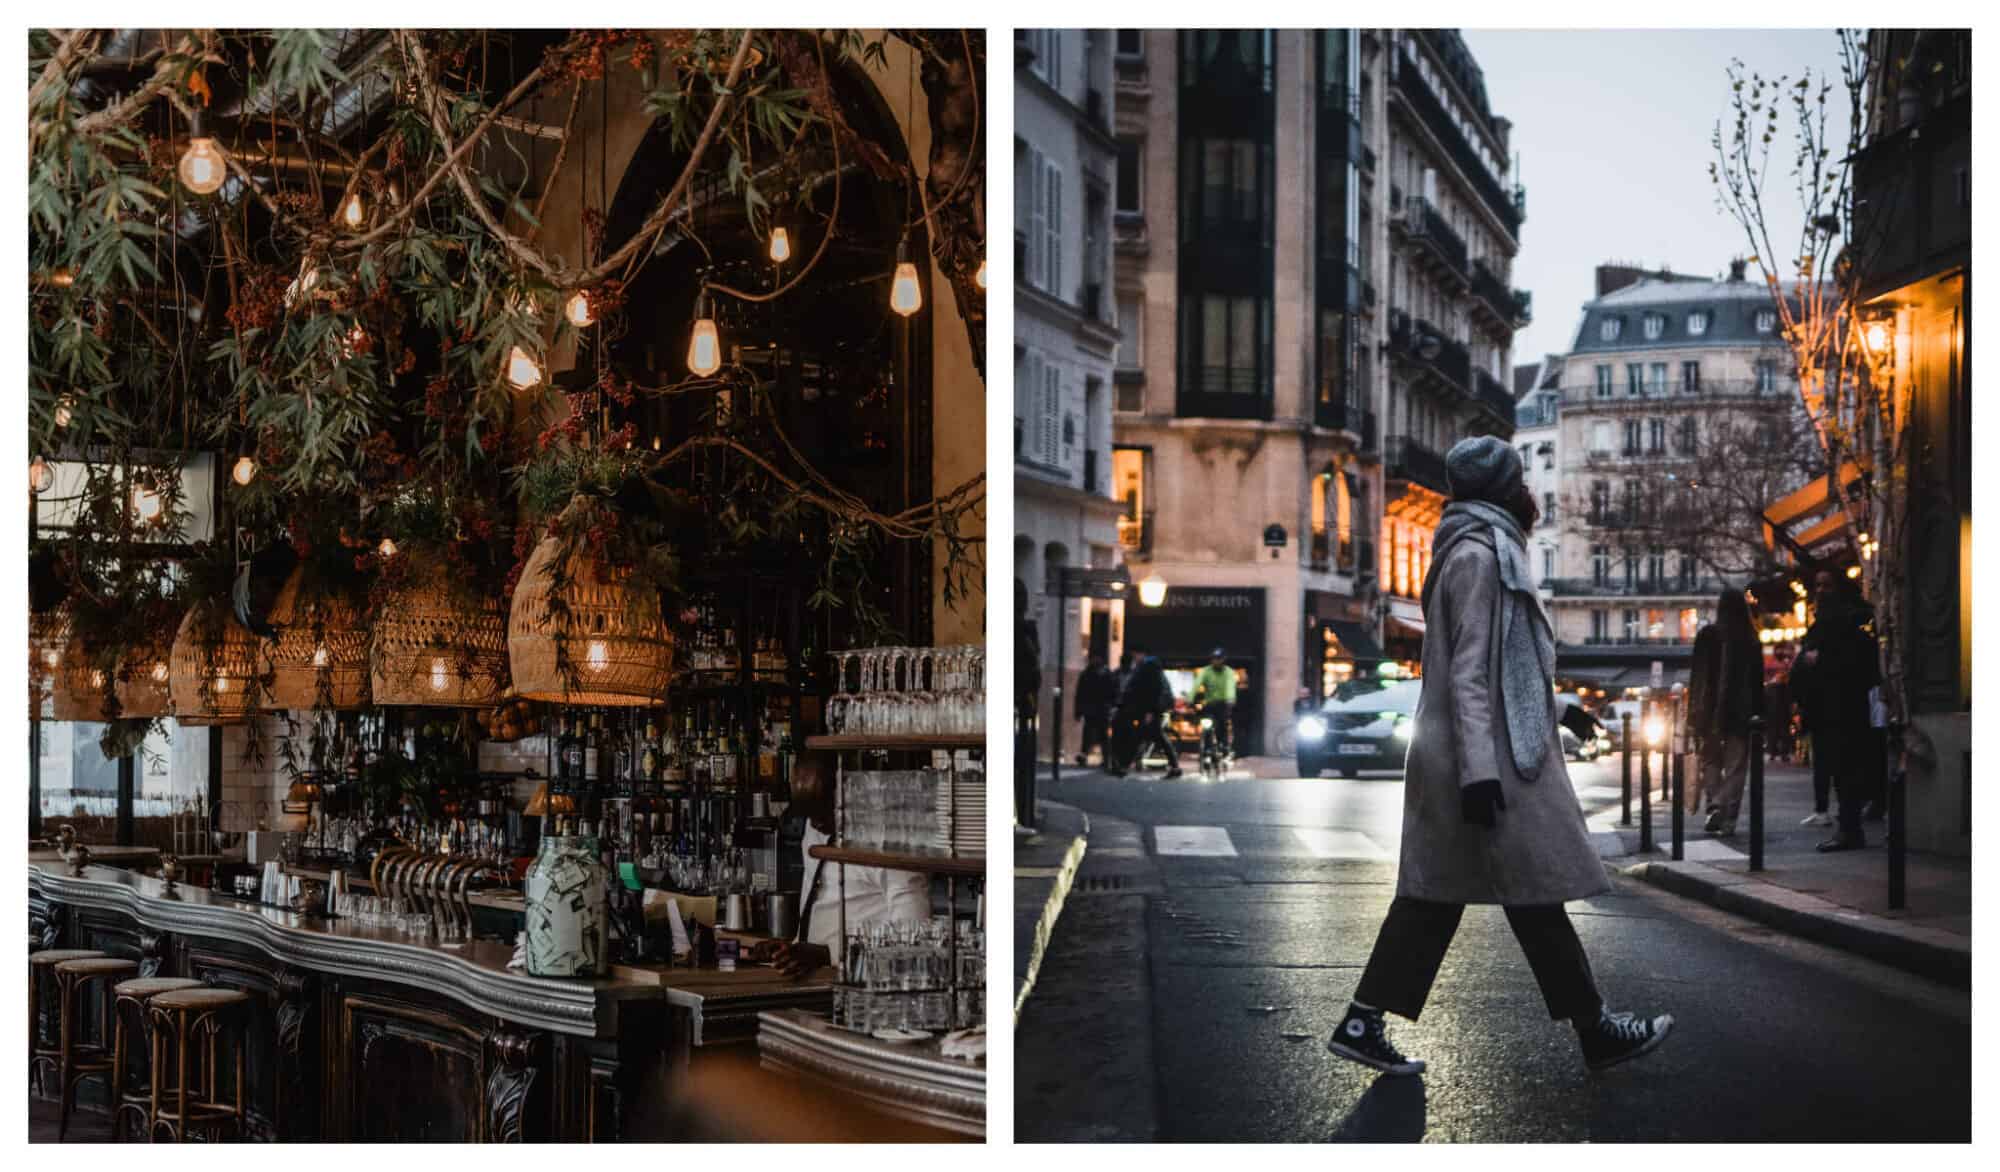 Left: A bar with basket lights, wooden bar and stools, and green plants hanging from the ceiling. Right: A woman in a gray coat, scarf and bonnet crosses a small Parisian street.